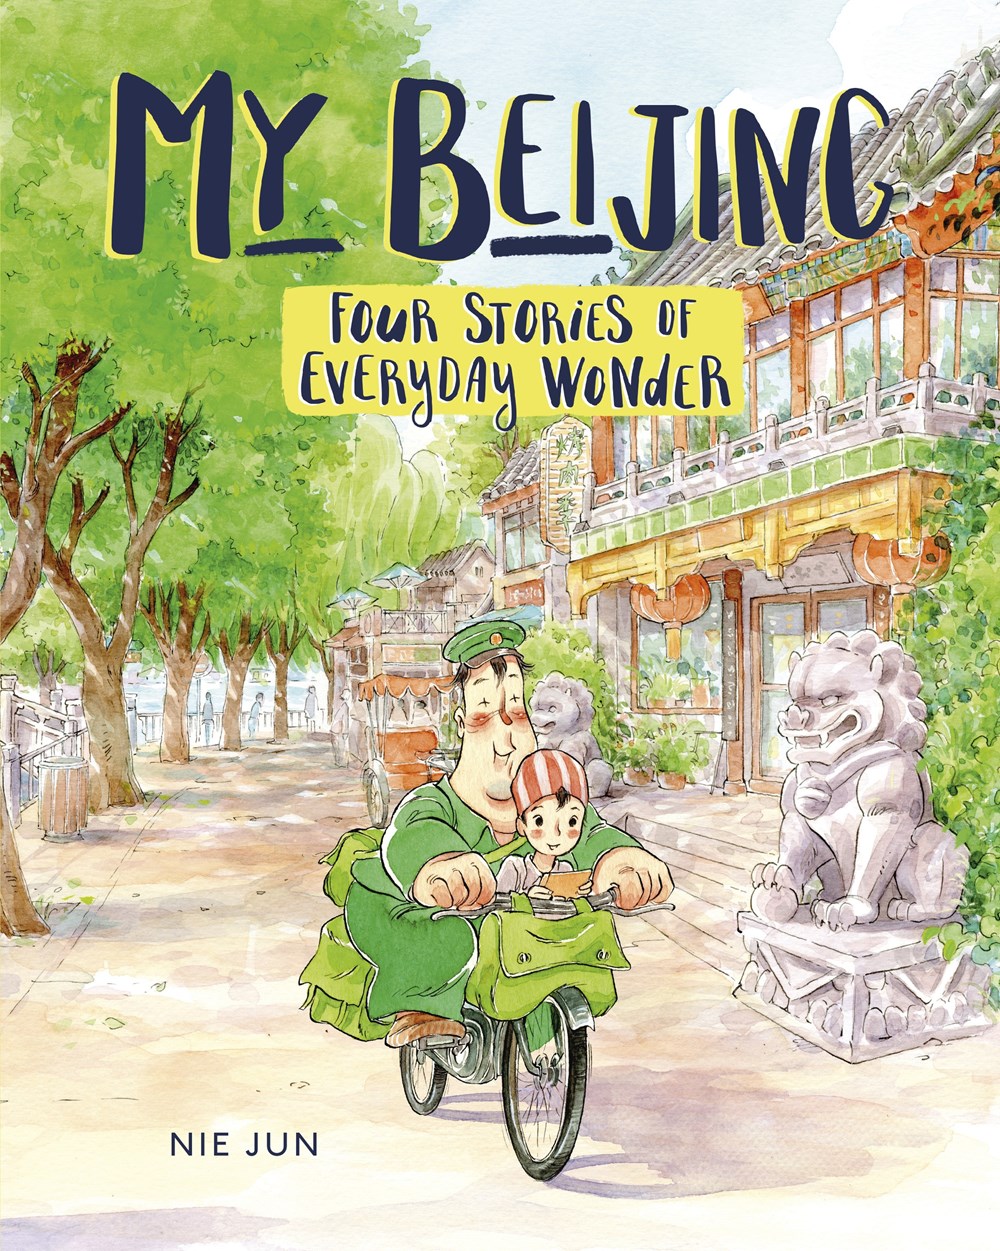 Cover of My Beijing: Four Stories of Everyday Wonder featuring an illustration of what appears to be a mailman on a bike with a young child riding with him. They are biking through an alleyway lined with trees and ornate houses.